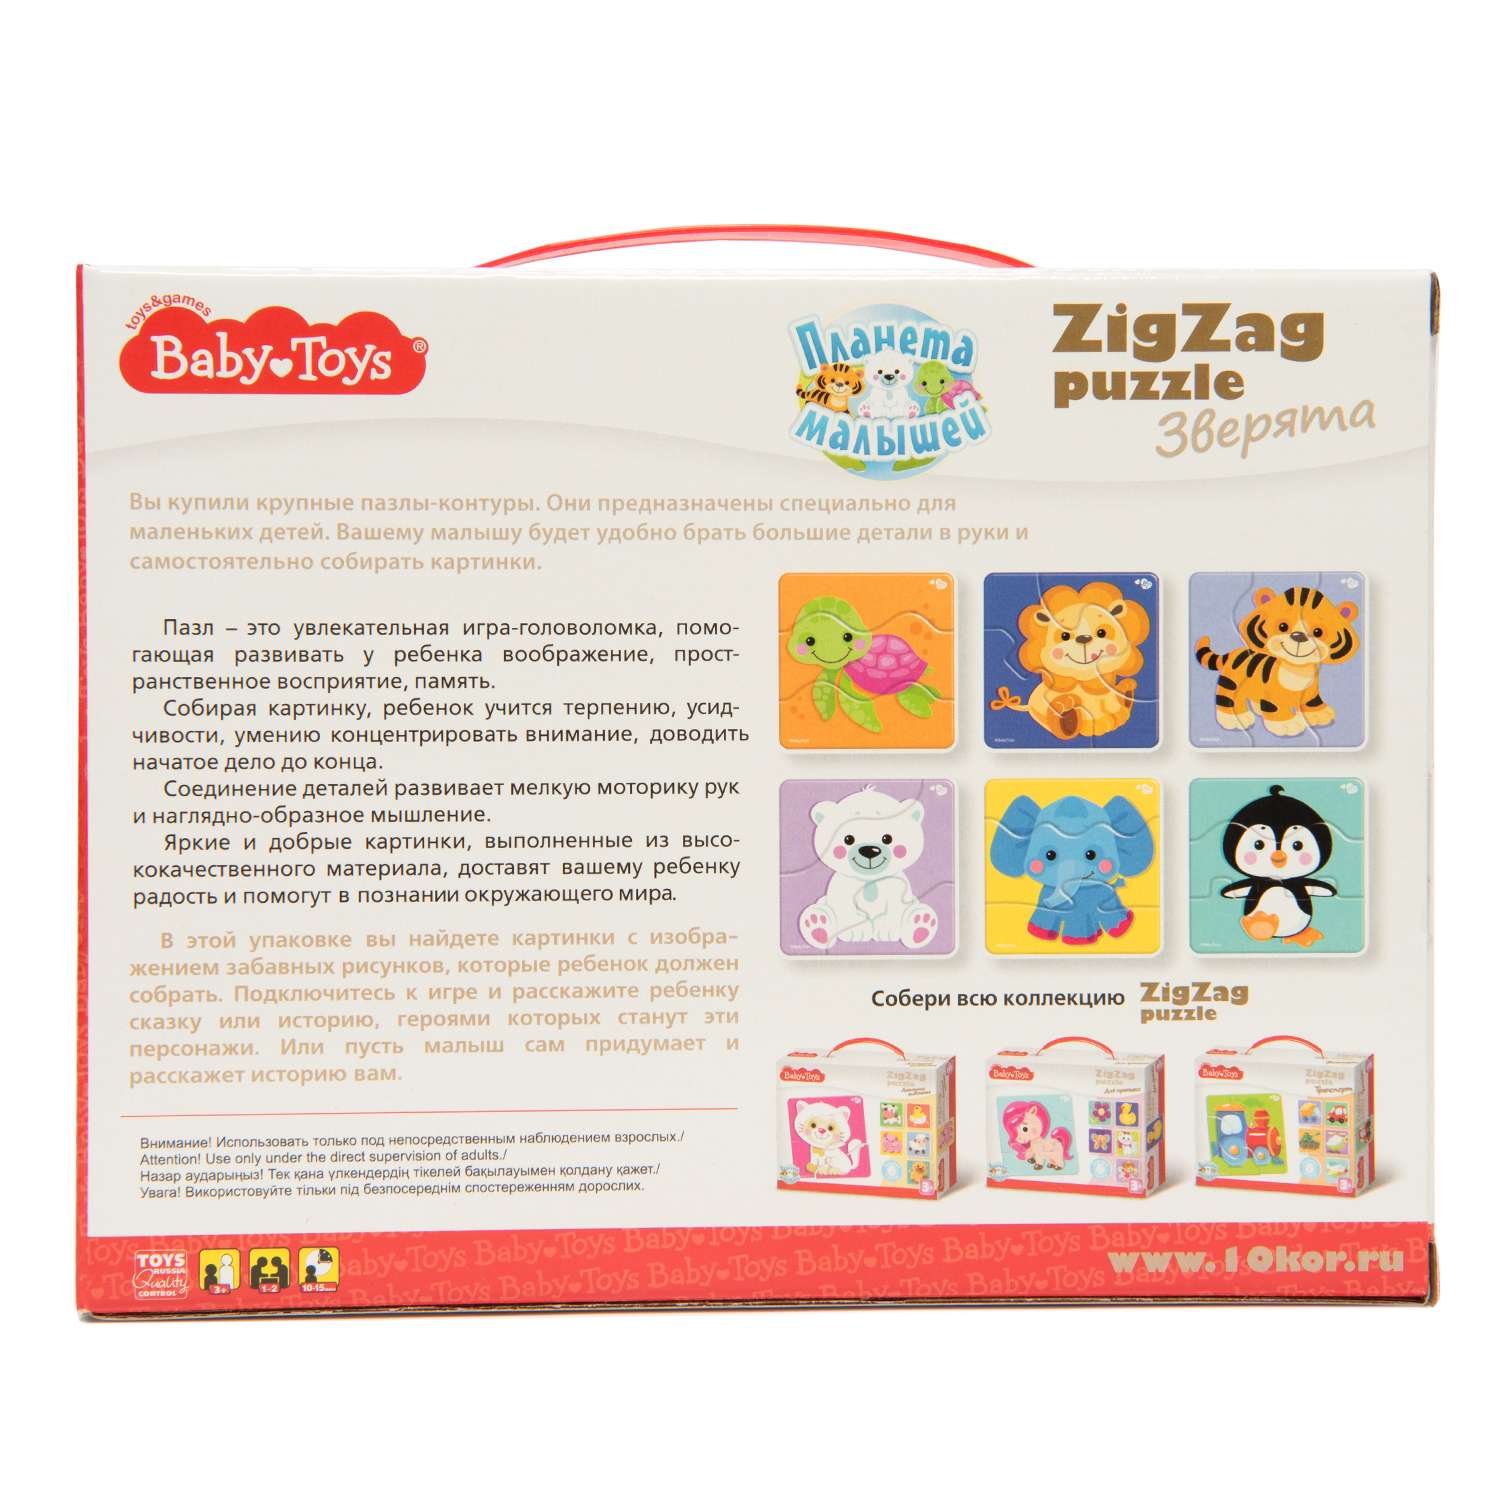 Пазлы Baby Toys ZigZag puzzle Звери 18 эл 02501 - фото 2